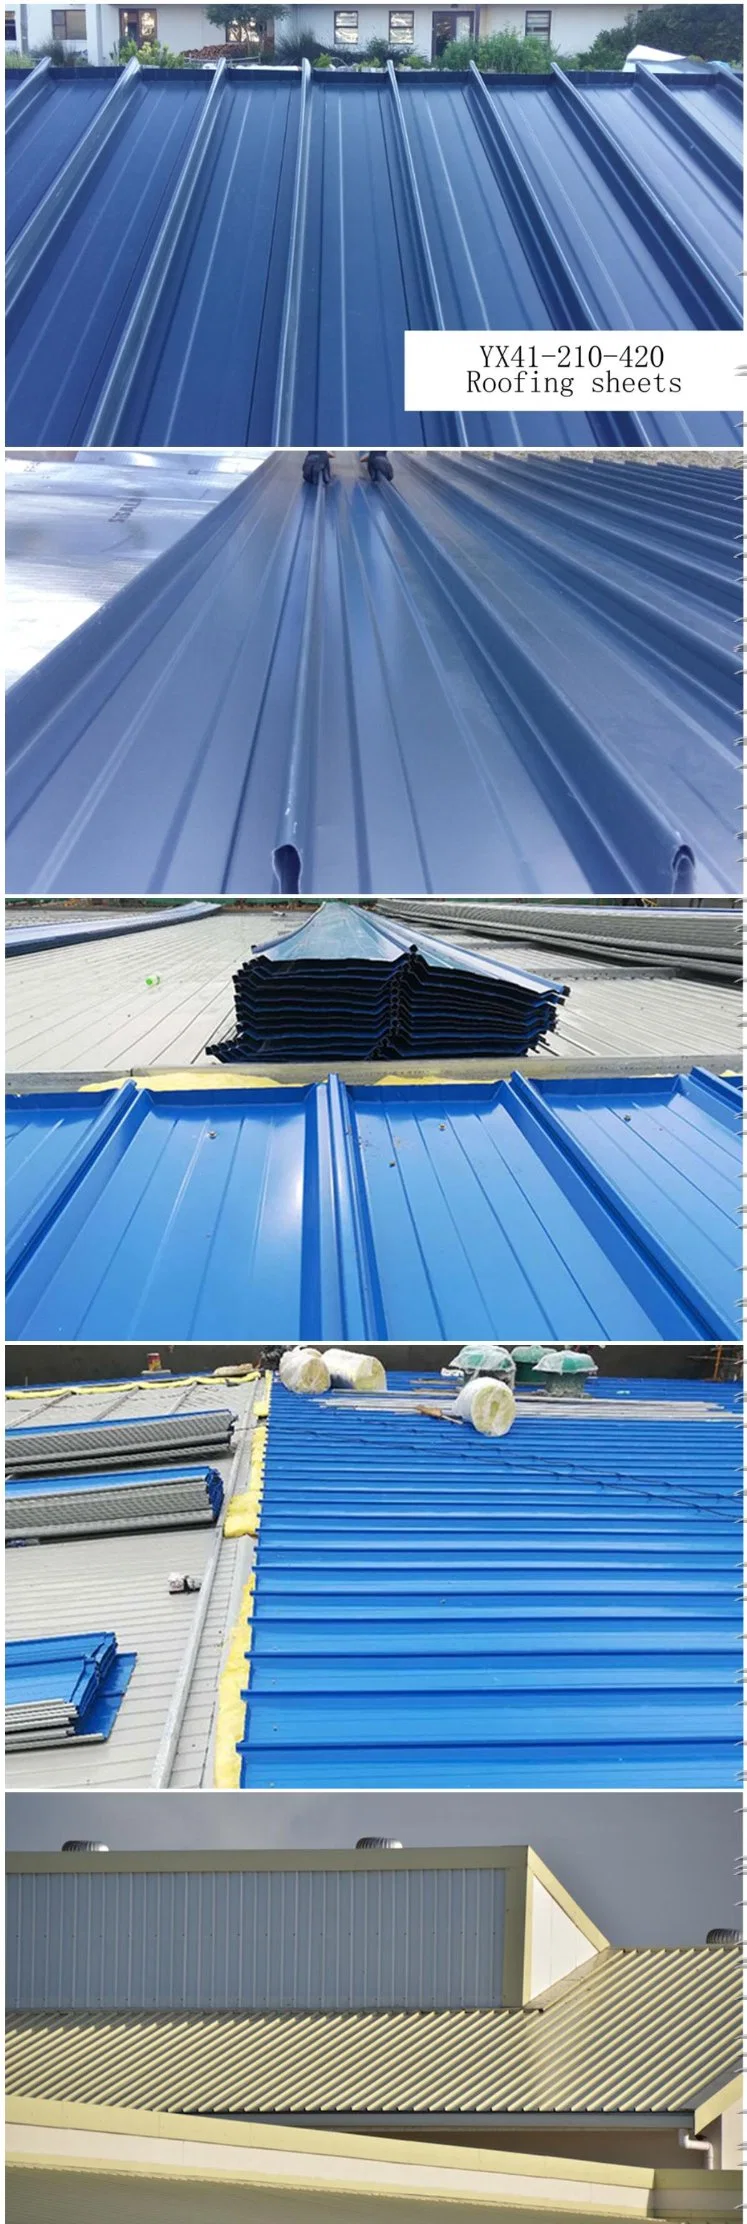 Prepainted Galvanized Ral Dx51 PPGI Color Coating Cladding Roofing Metal - Latest Results